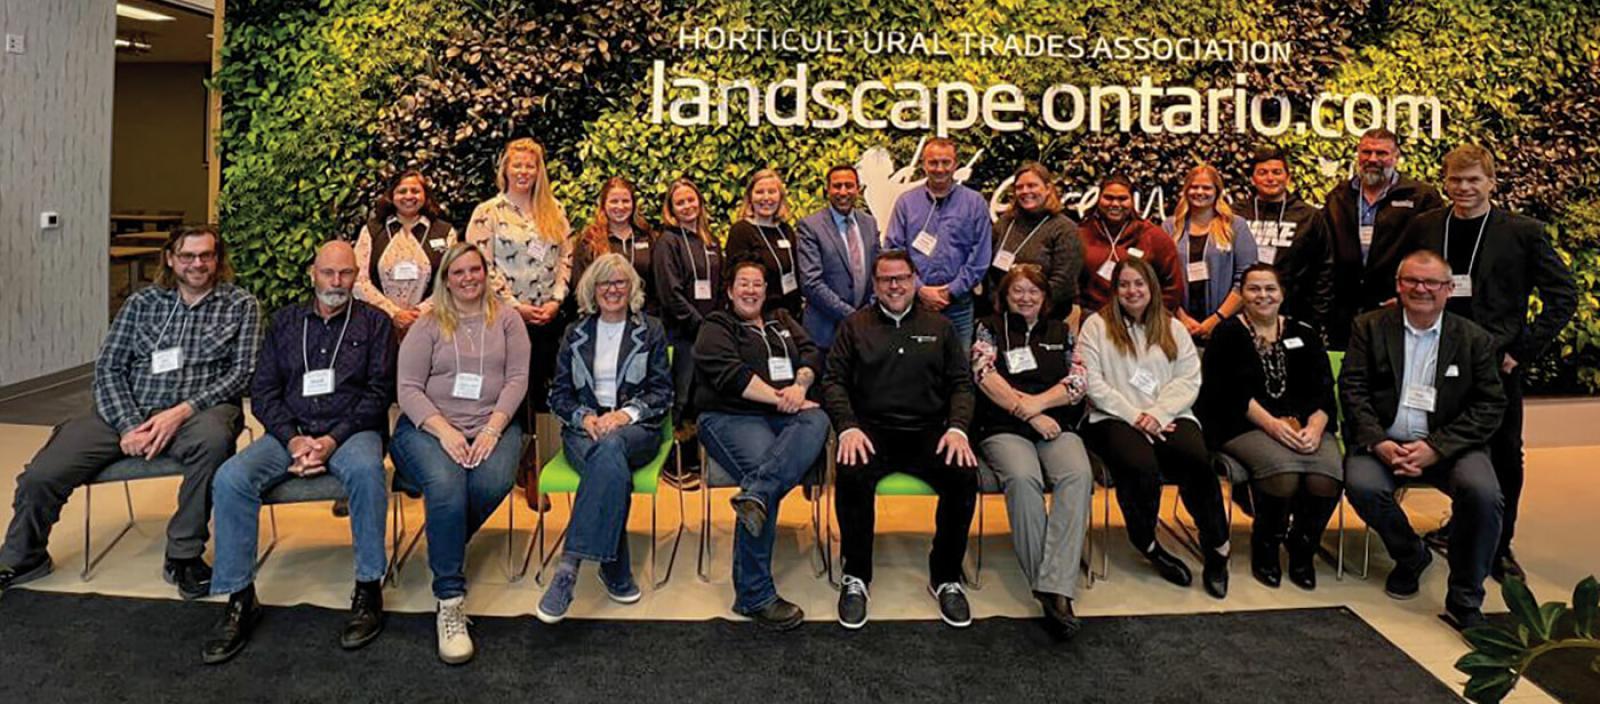 Stakeholders in the Apprenticeship Program gathered at Landscape Ontario on March 10.